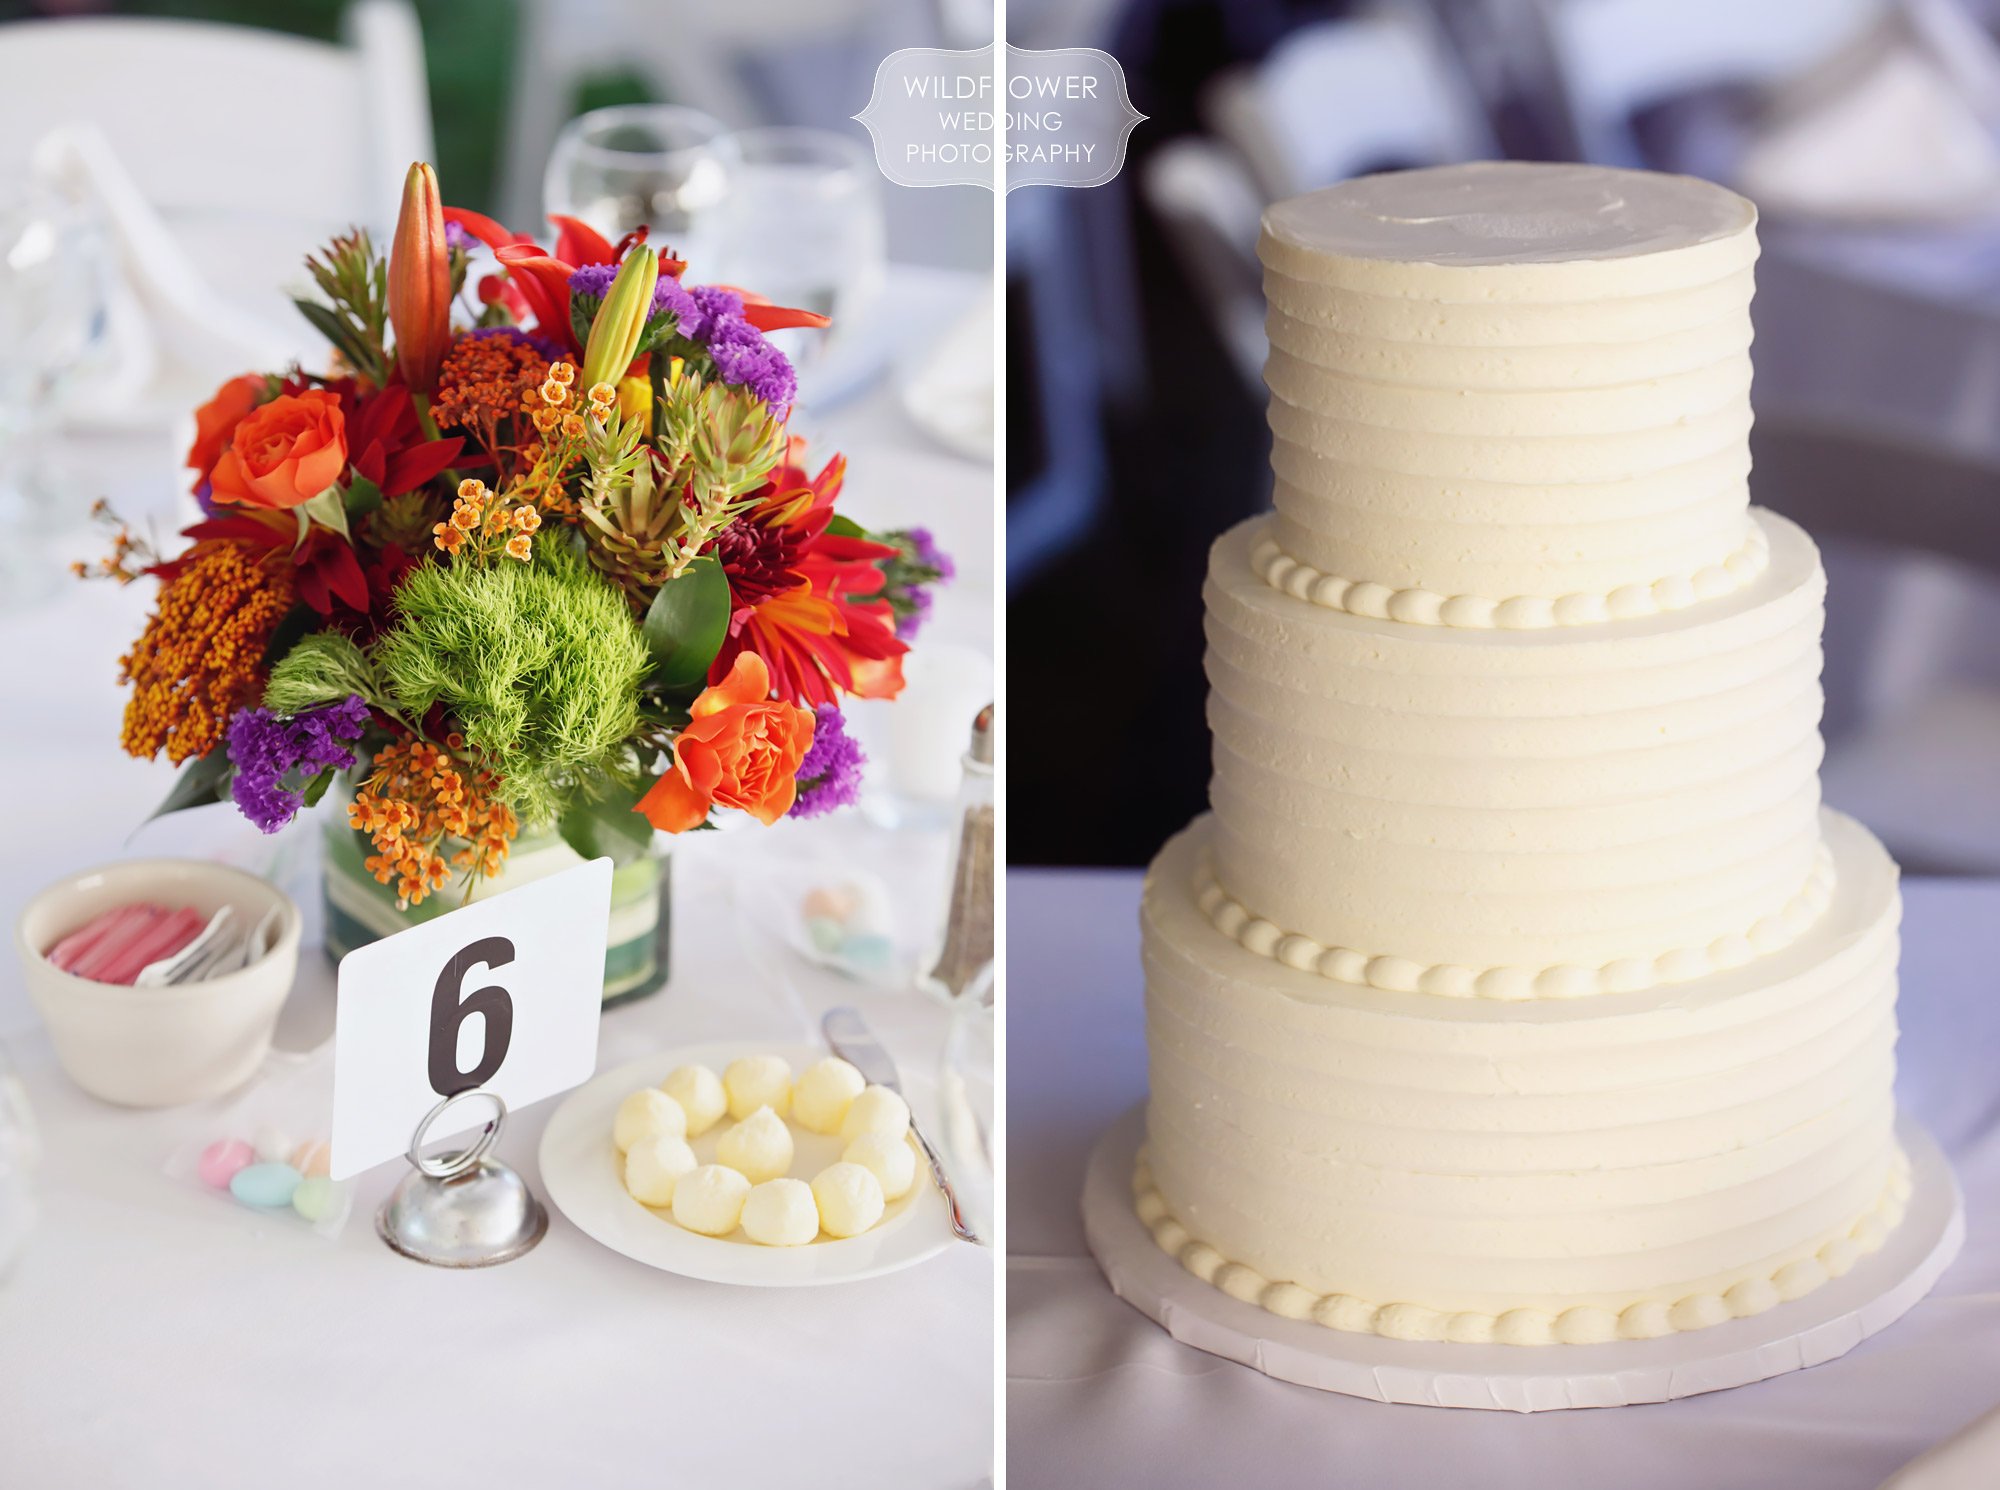 October wedding flowers with a simple wedding cake by Russo's at this backyard reception in St. Louis.